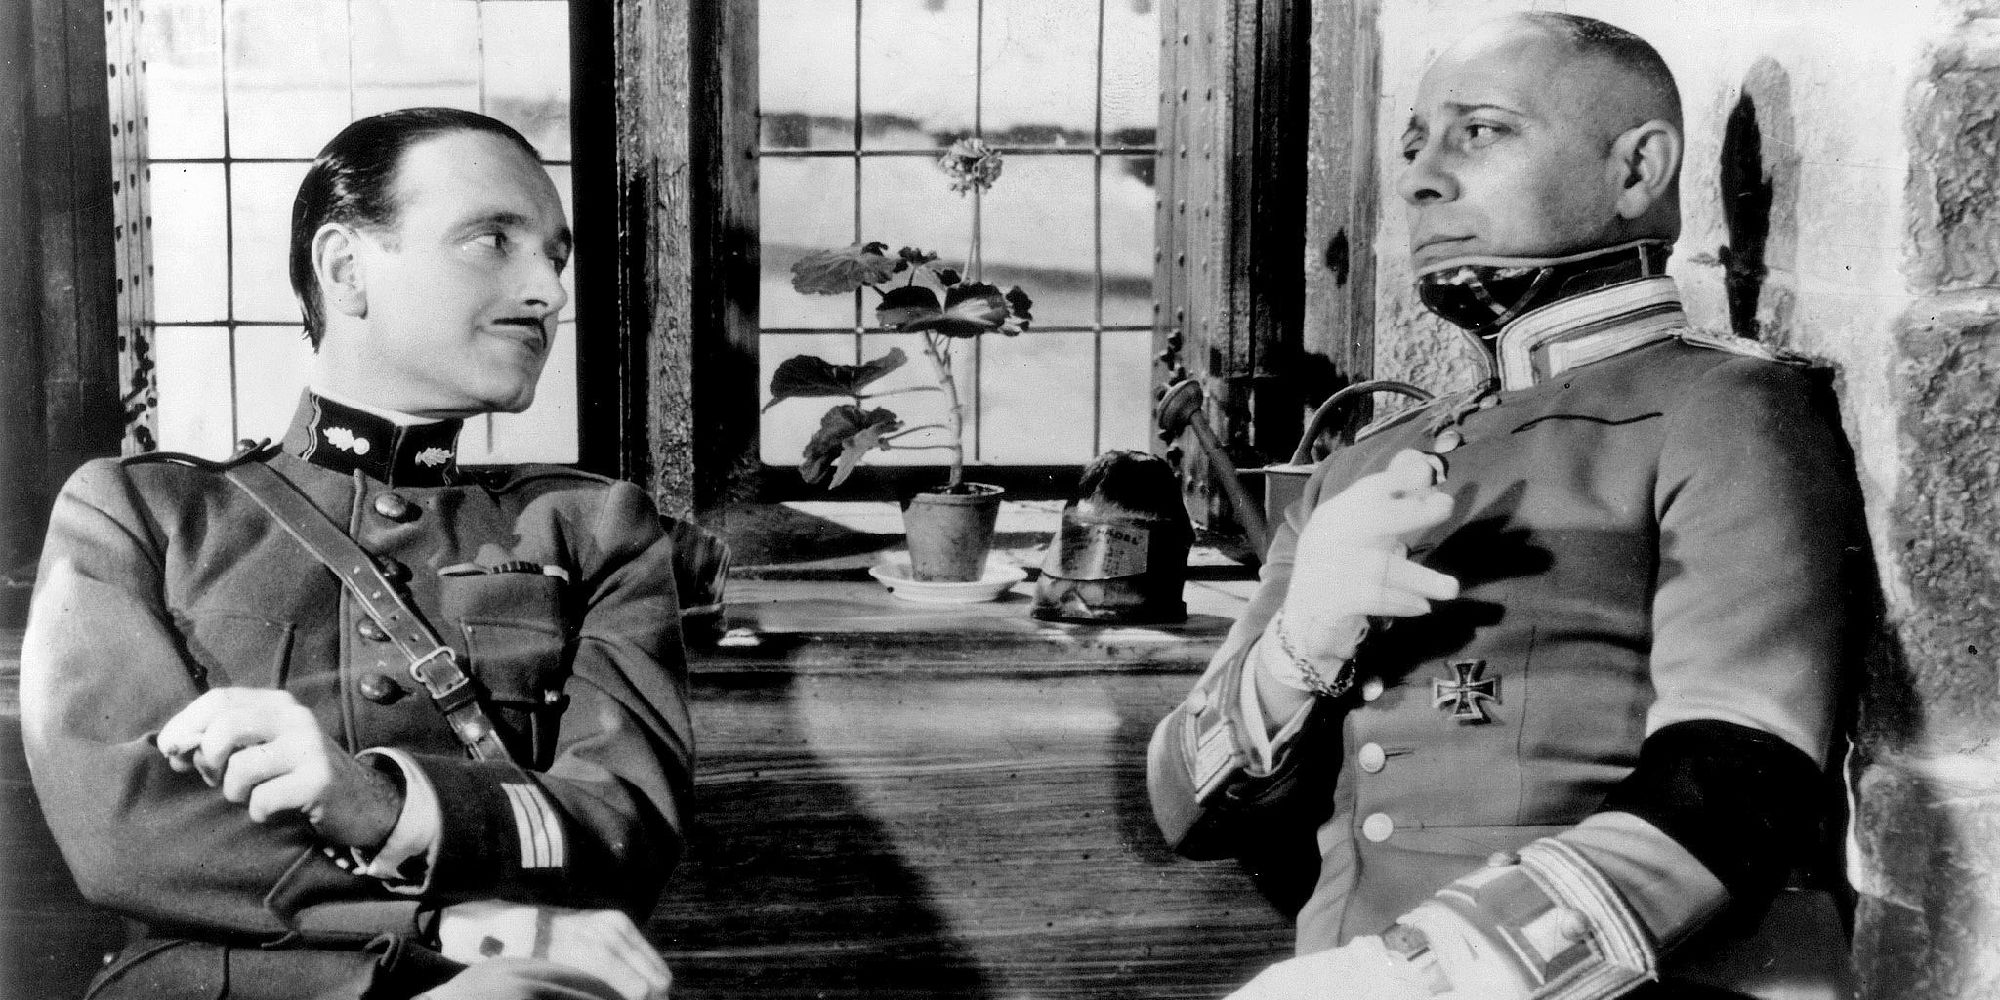 Erich von Stroheim and Pierre Fresnay sitting next to each other in The Grand Illusion.